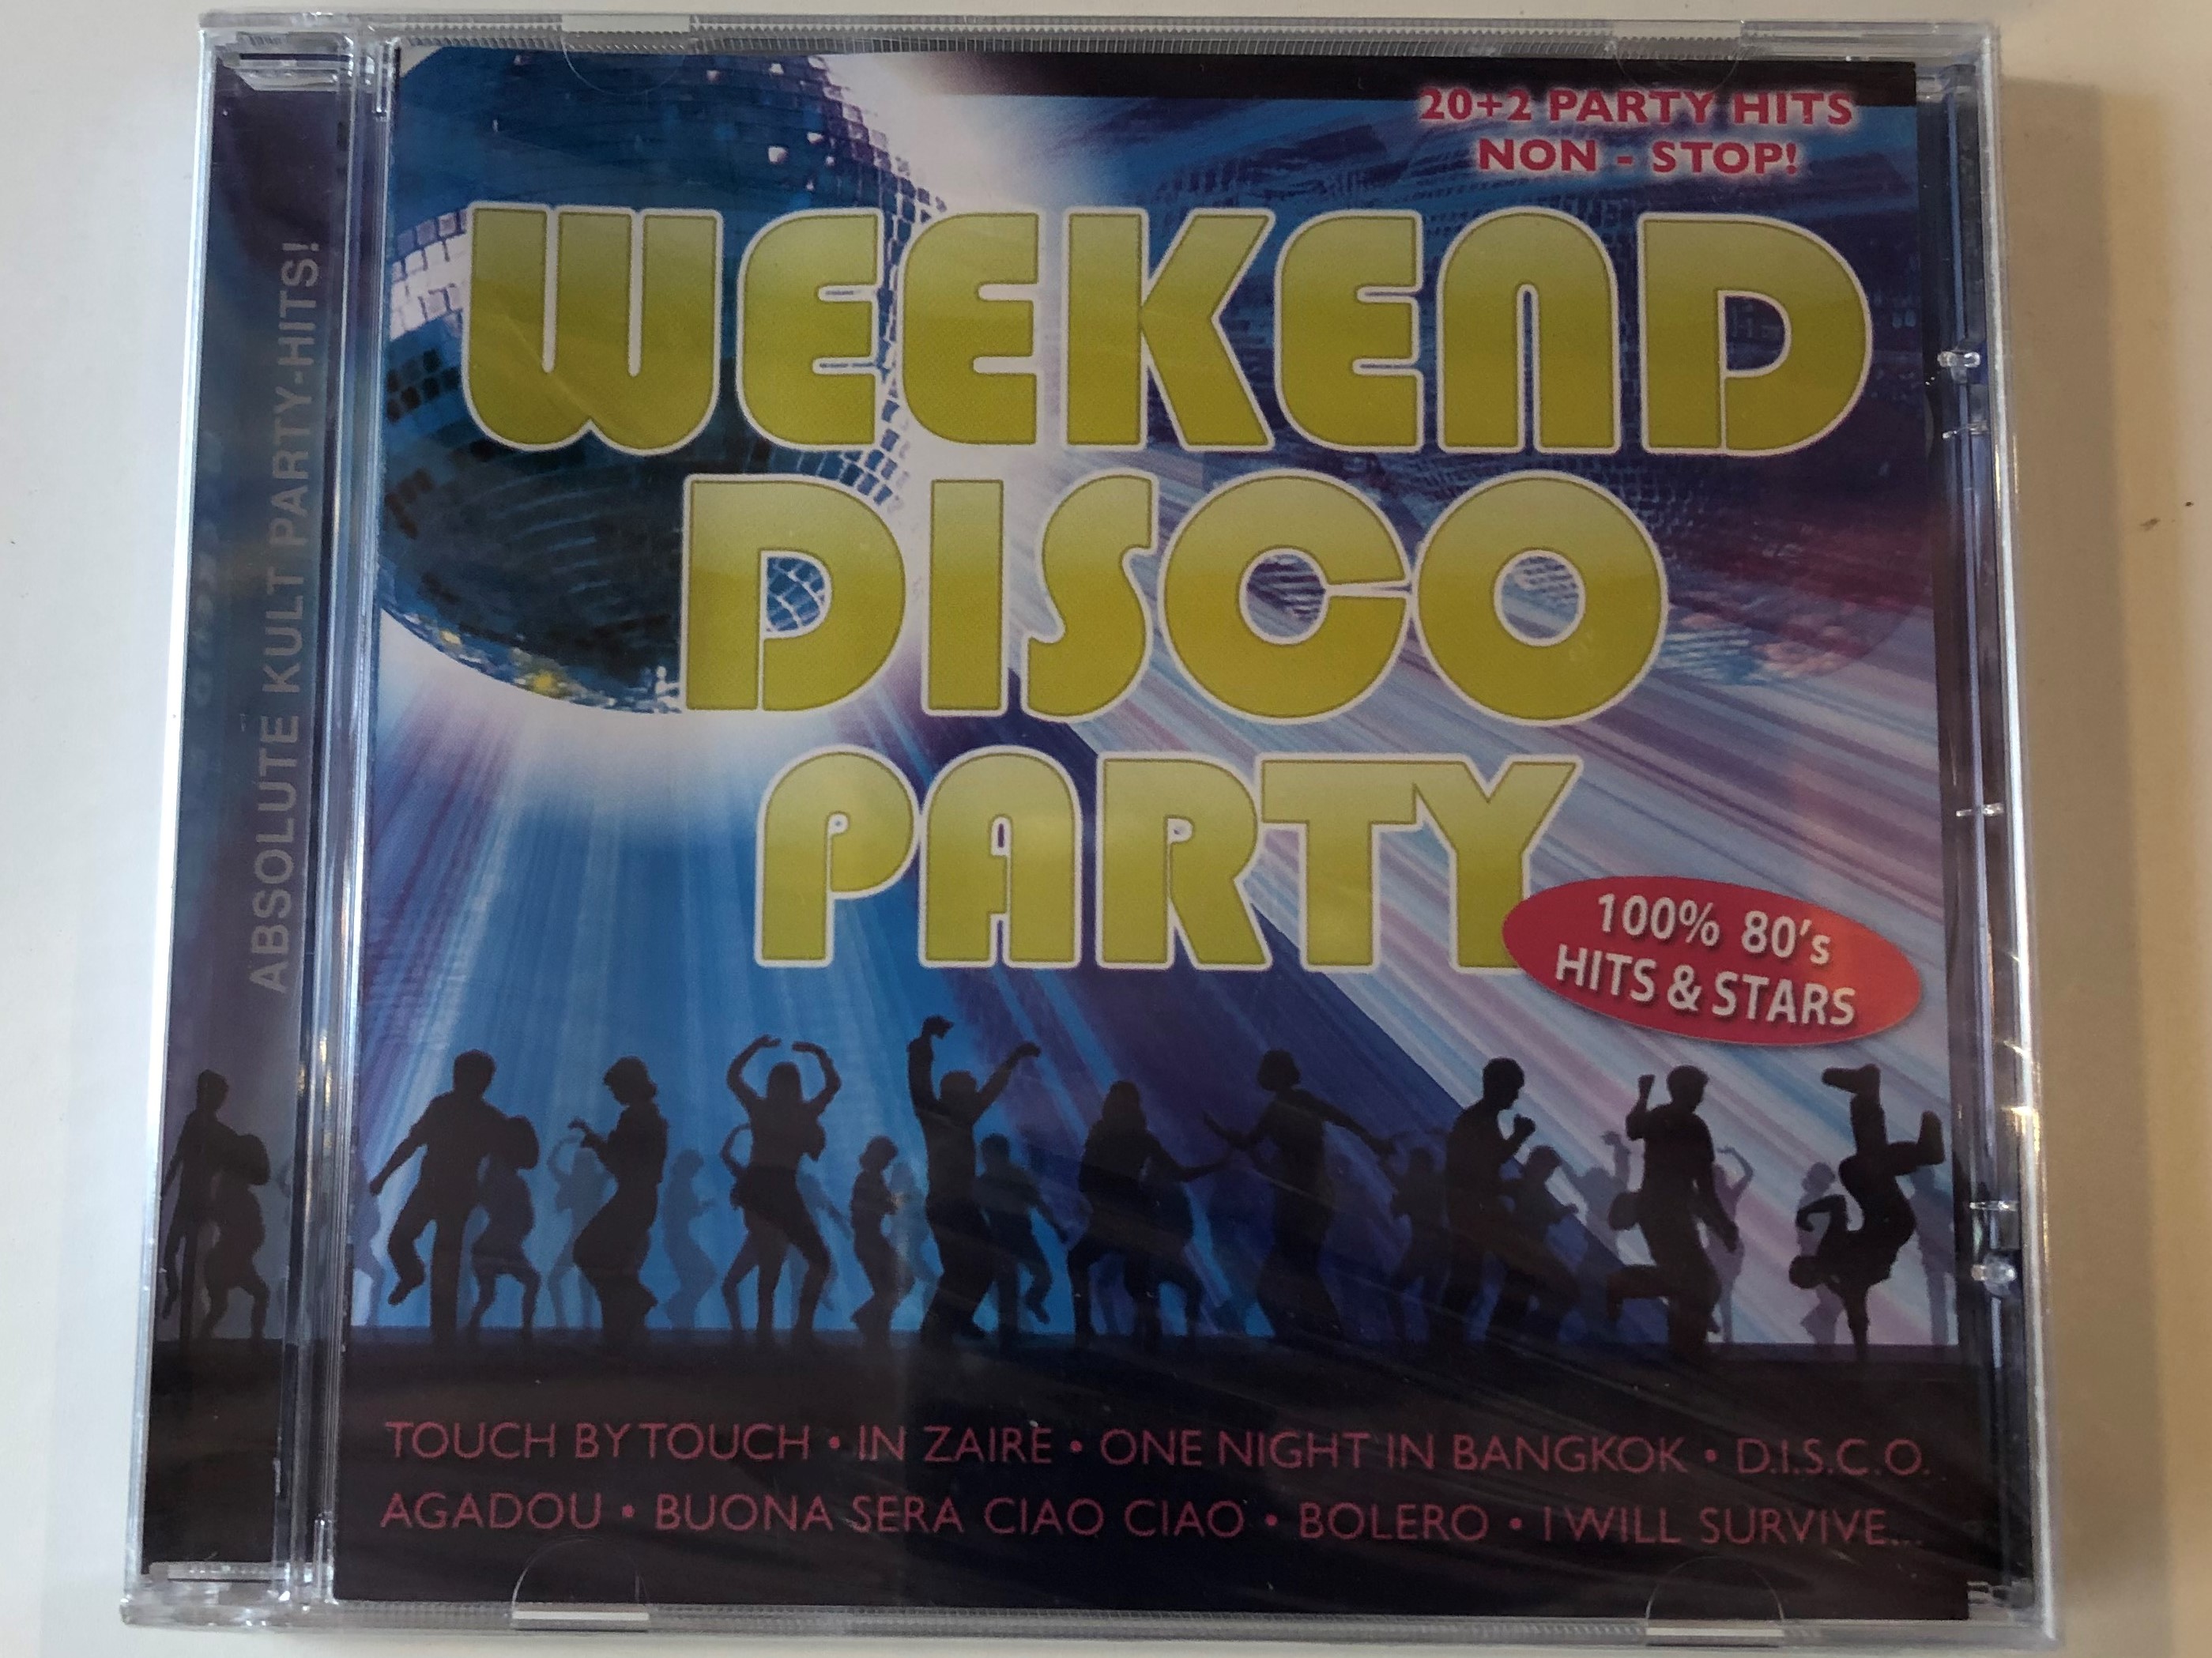 Weekend Disco Party / 100& 80's Hits & Stars / Touch By Touch, In Zaire,  One Night In Bangkok, D.I.S.C.O., Agadou, Buona Sera Ciao Ciao, Bolero, I  Will Survive... / Hargent Media